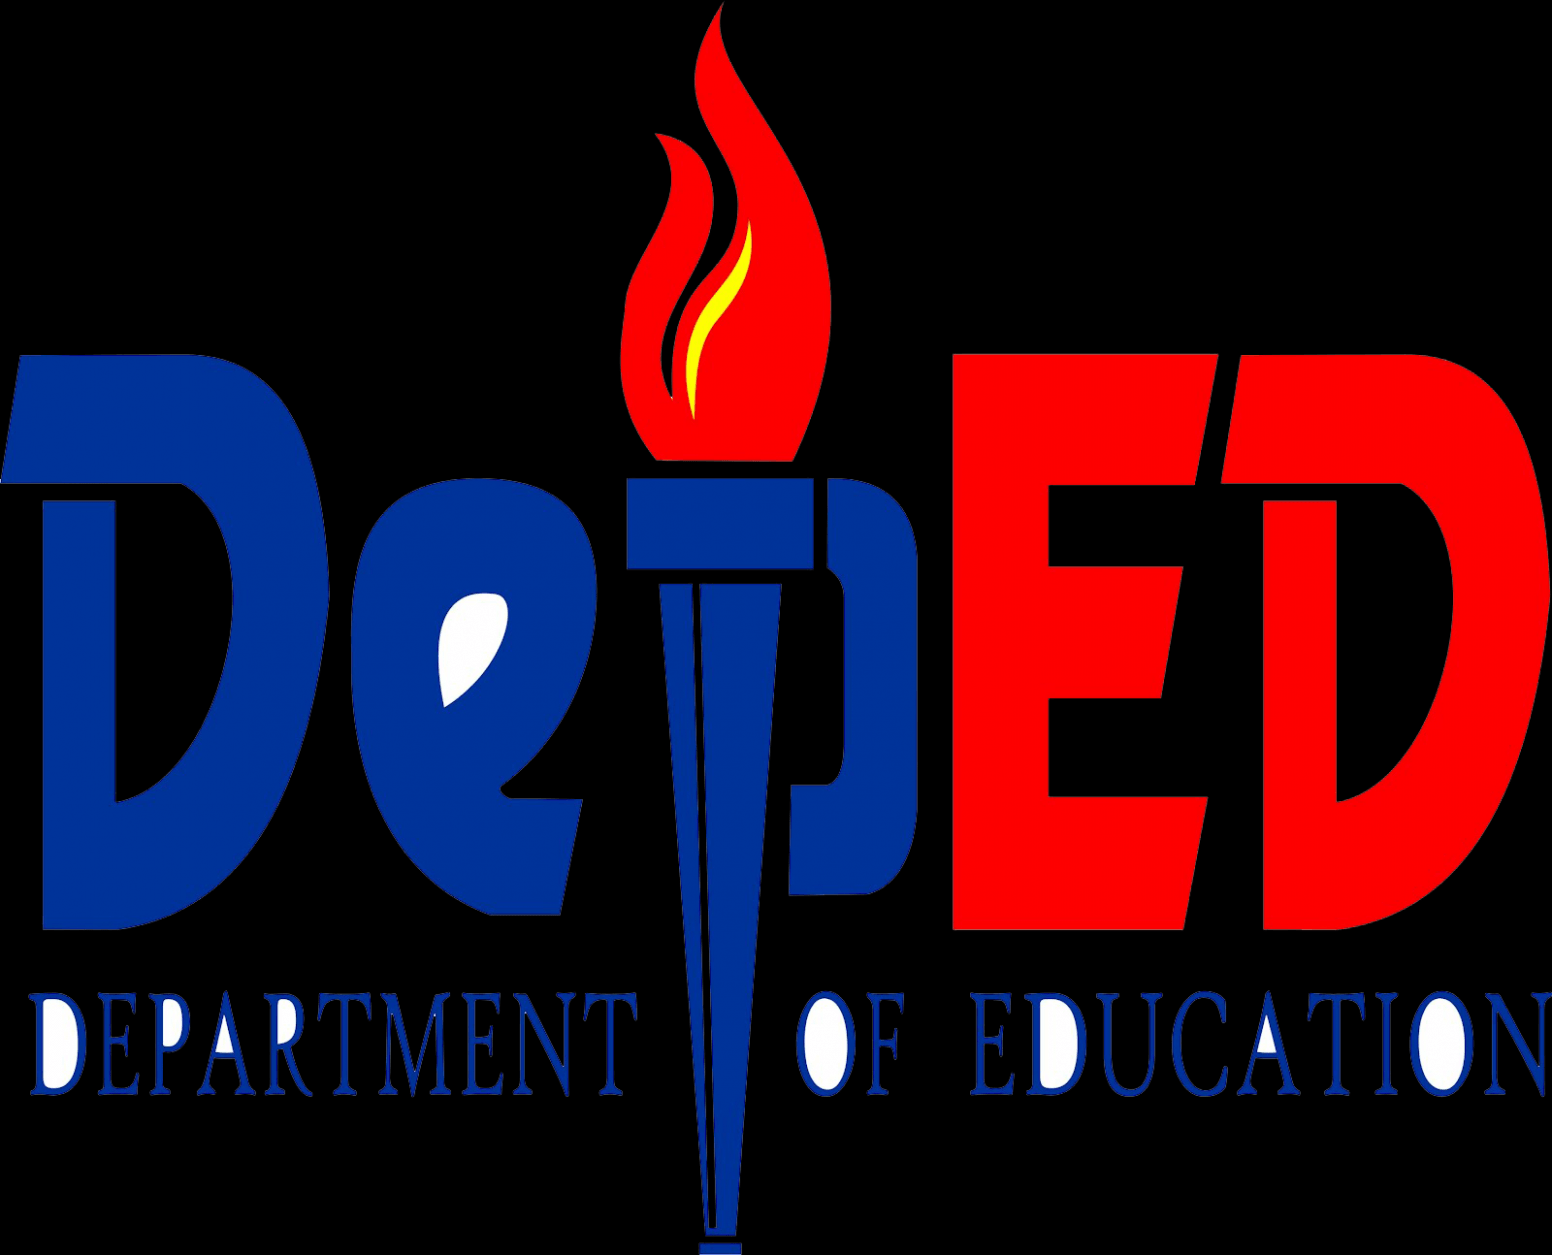 Deped Logo Meaning 8592